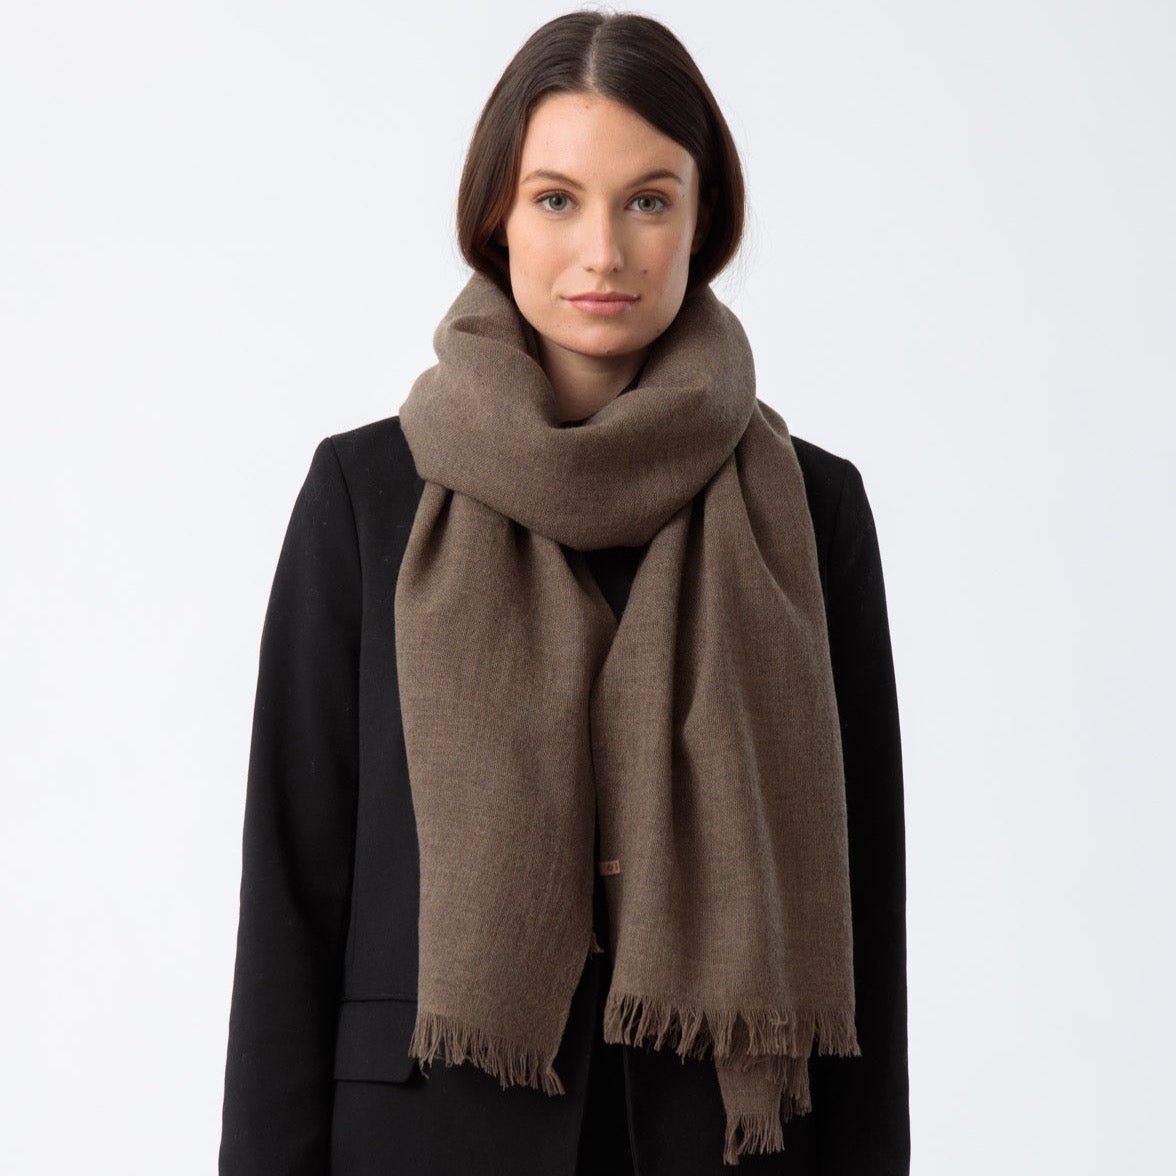 Model wears a brown scarf loosely wrapped around the neck and hangs down the front. The Merino Woven Scarf in Nutmeg Brown is from designed by Dinadi and handcrafted in Nepal.